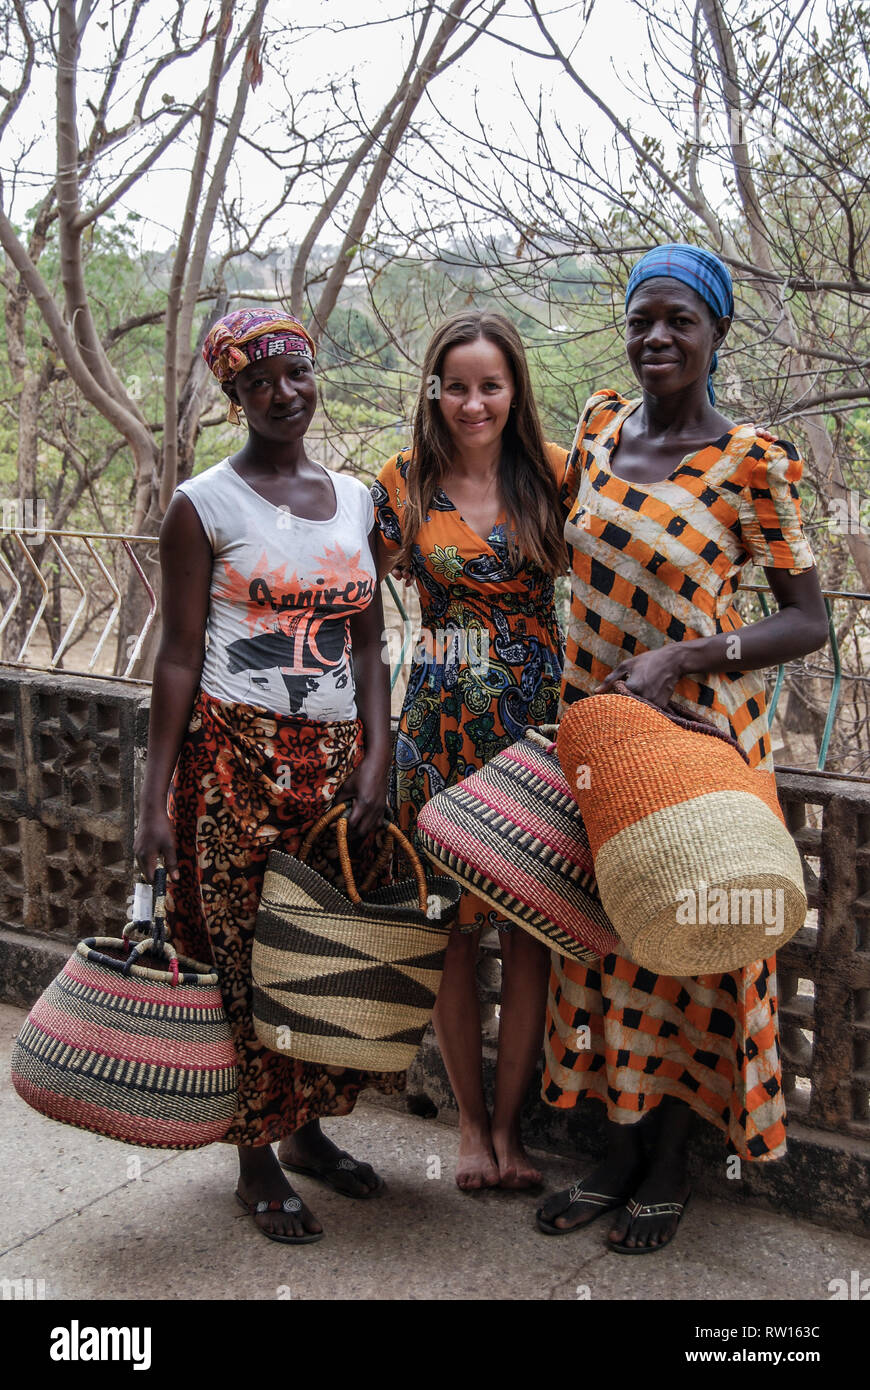 A nice photo of three happy and smiling women wearing traditional Ghanaian clothes posing for the camera with beautiful handwoven Bolga baskets Stock Photo